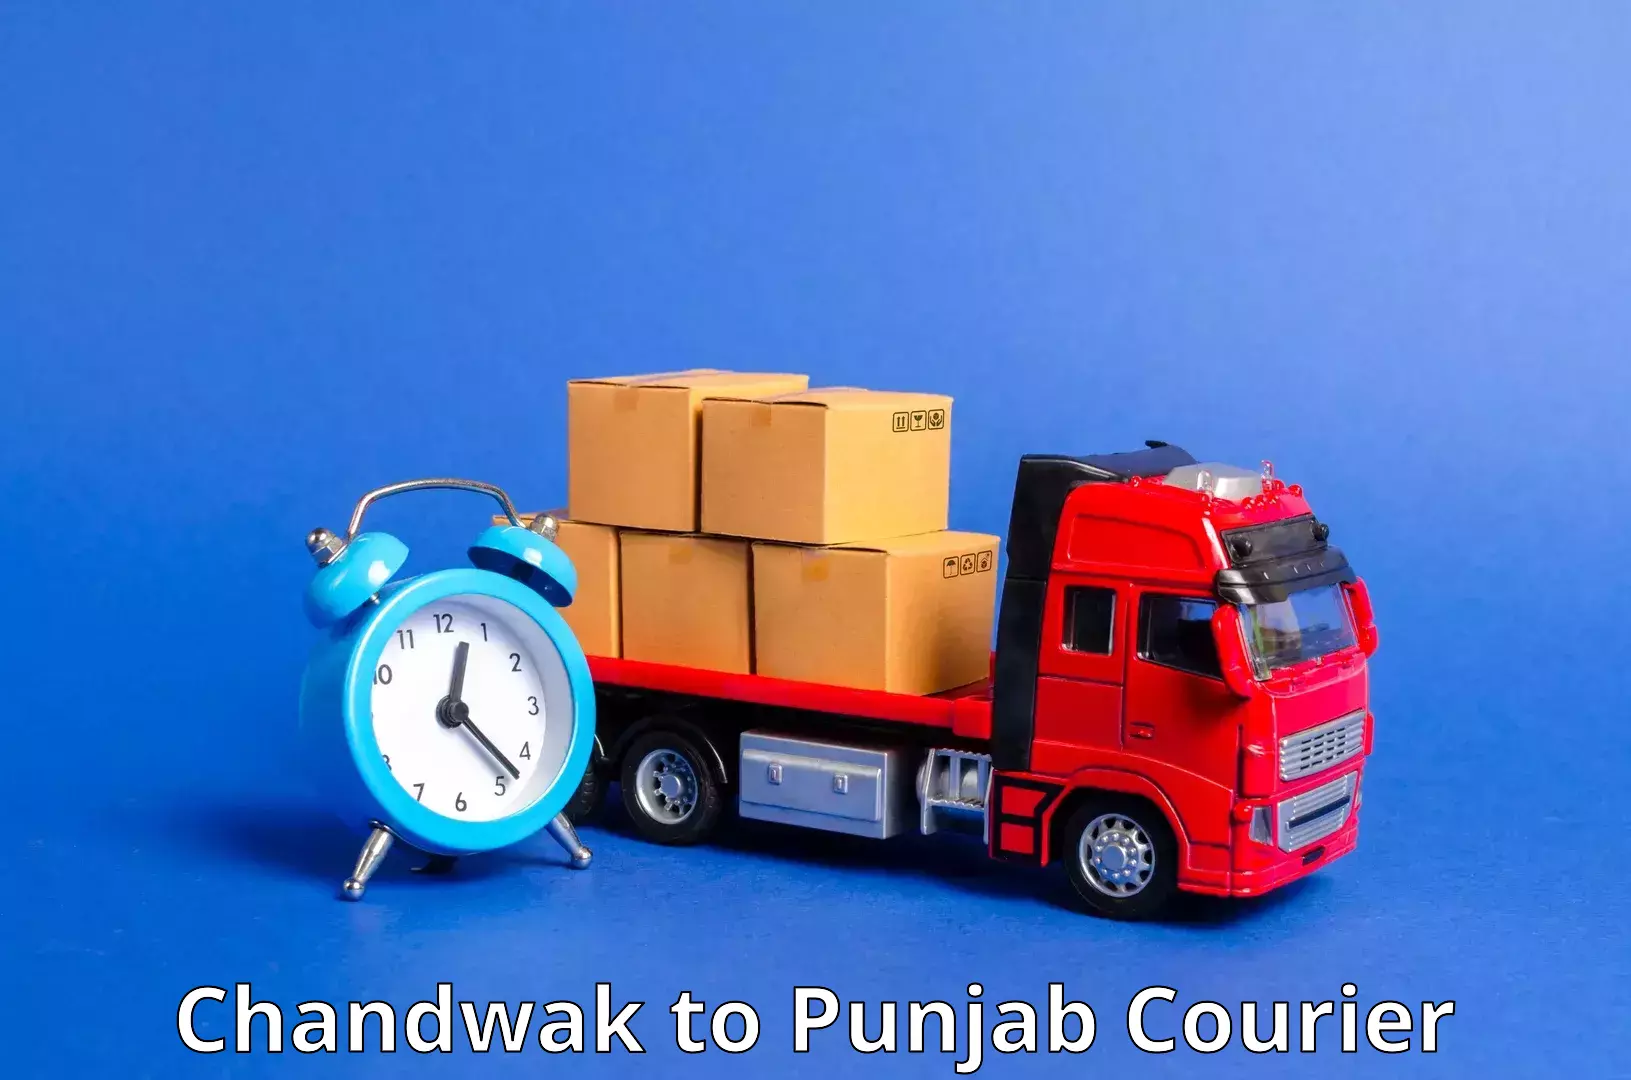 End-to-end delivery Chandwak to Central University of Punjab Bathinda